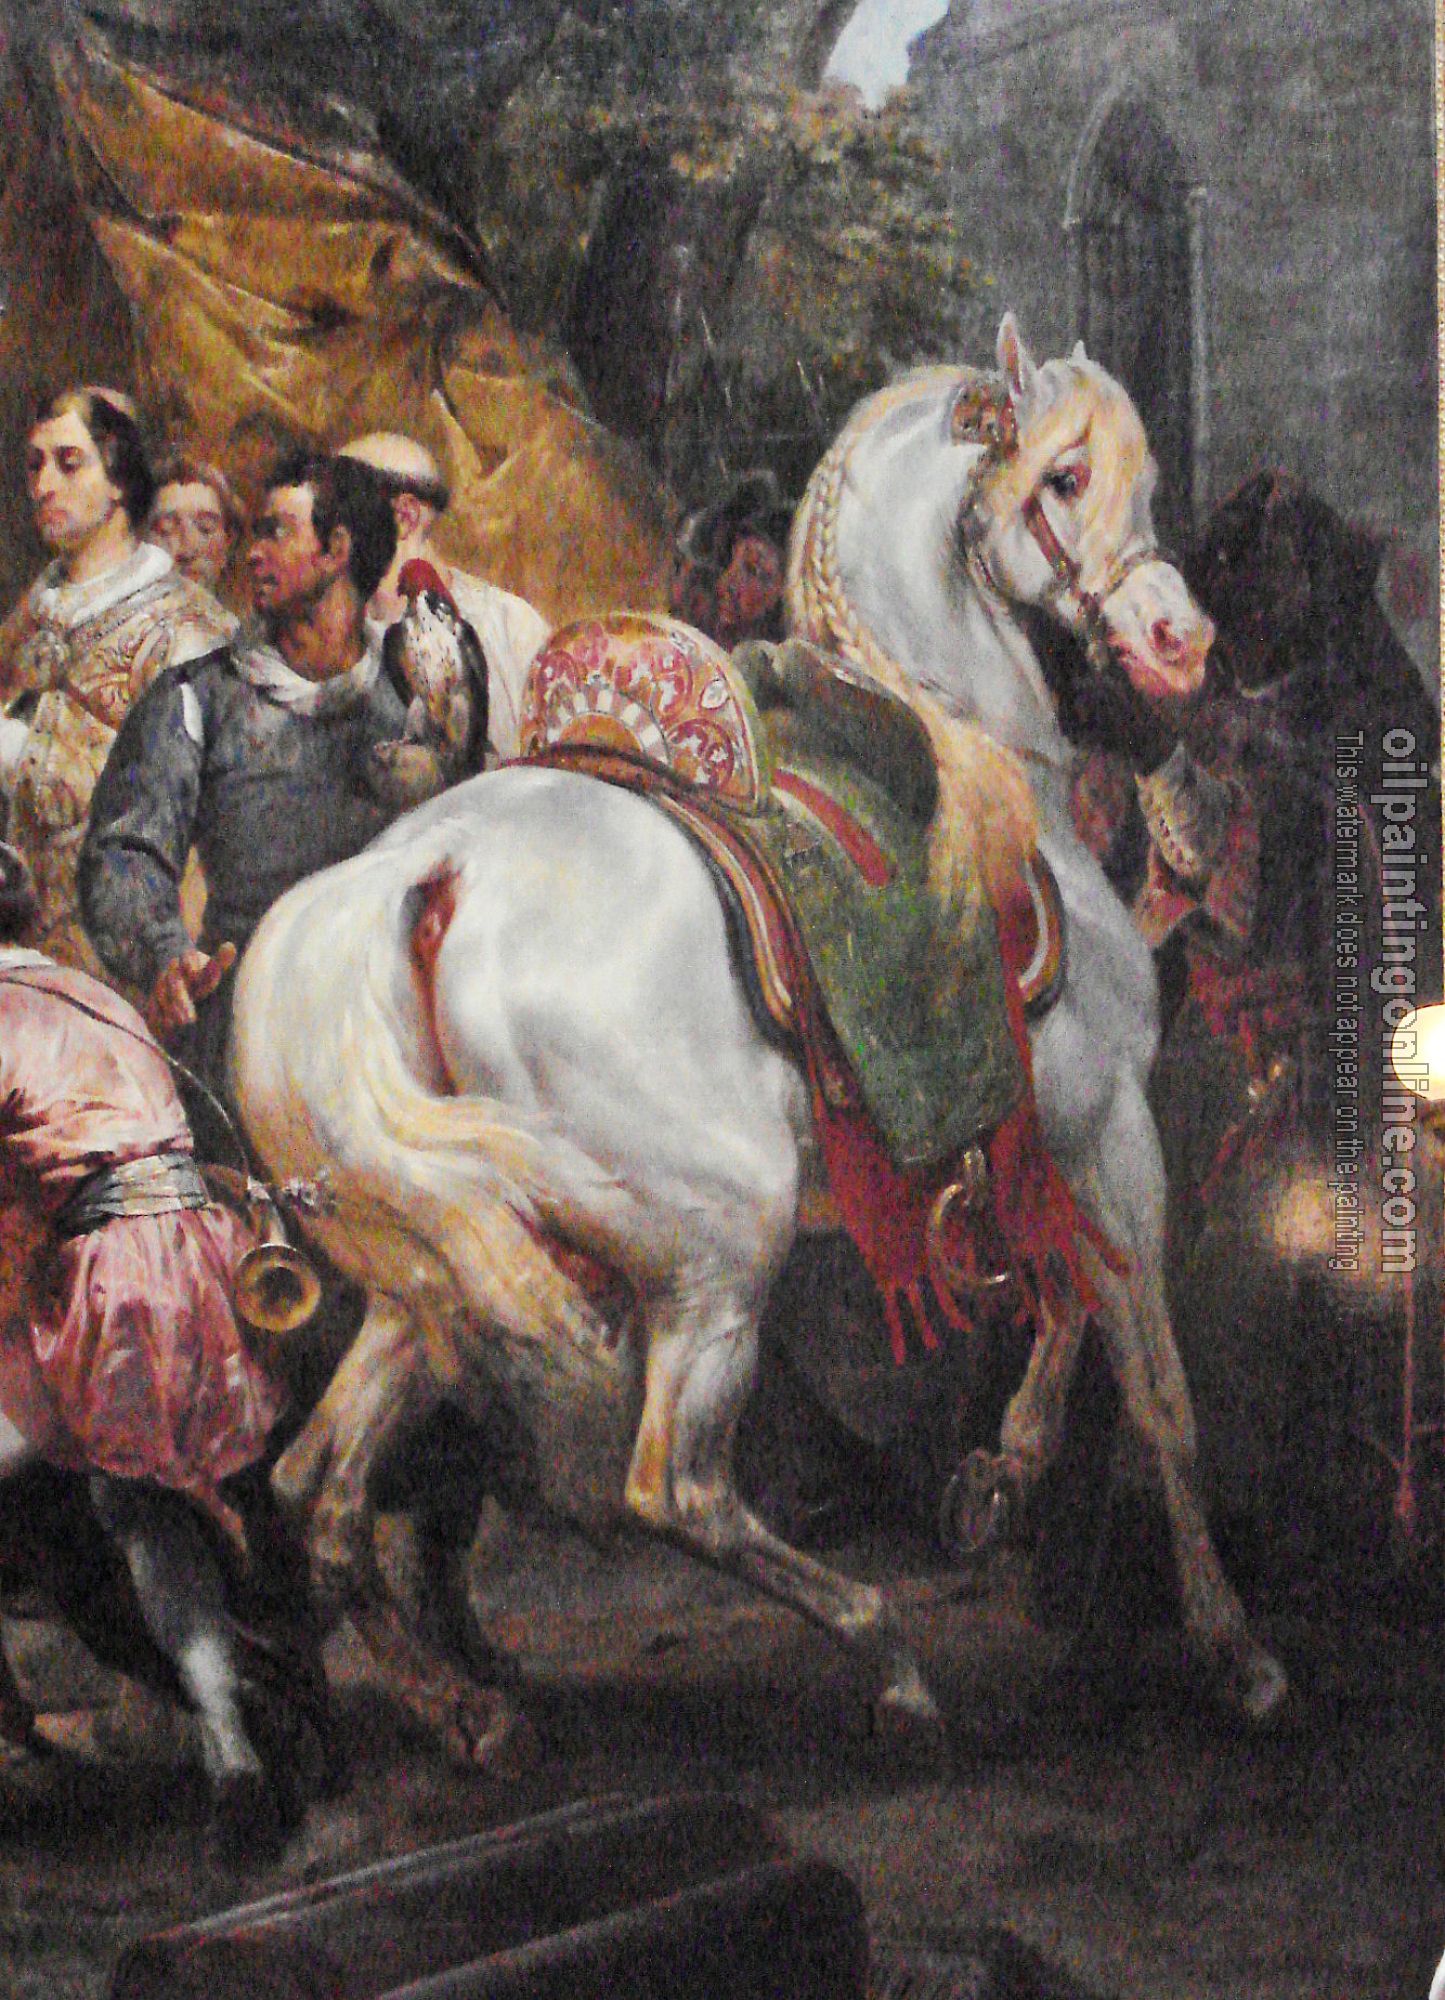 Vernet, Horace - Philippe Auguste Arabian horse and Moorish attendant at the Battle of Bouvines